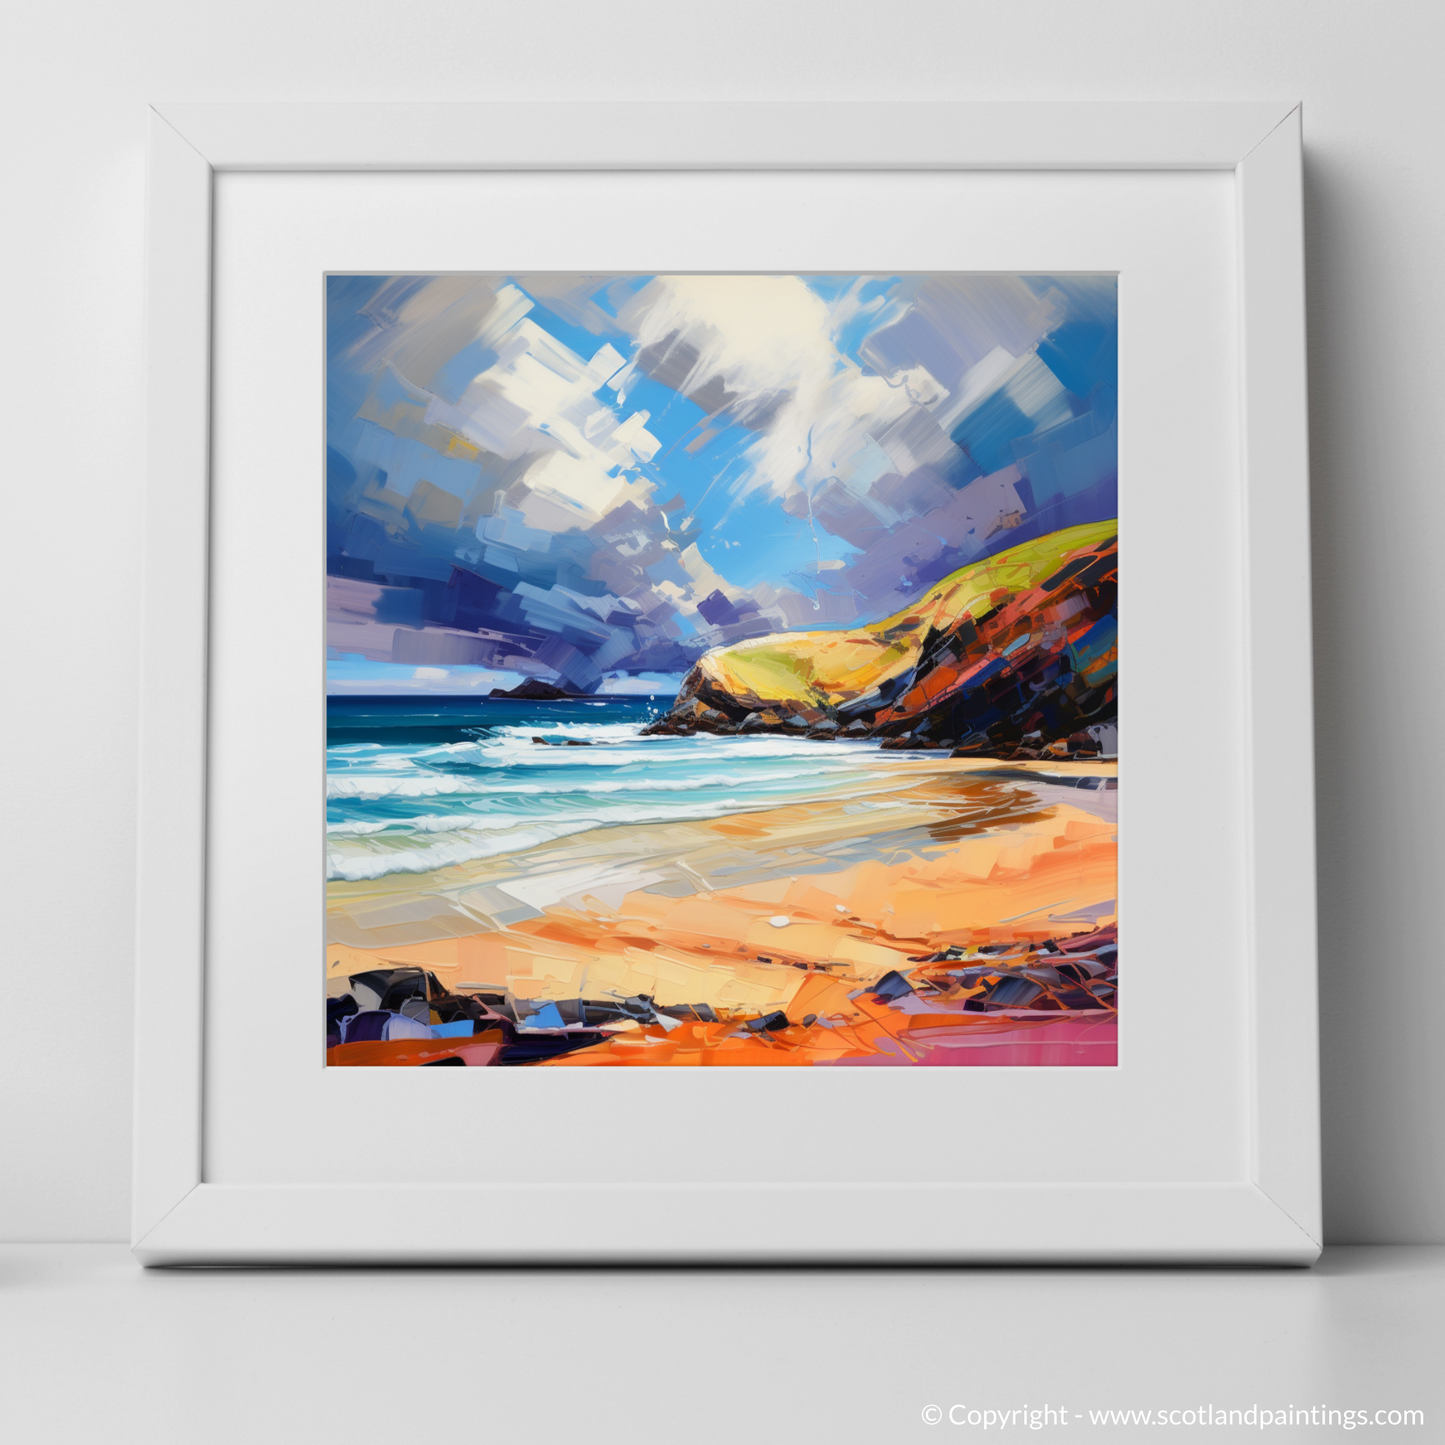 Art Print of Sandwood Bay with a stormy sky with a white frame